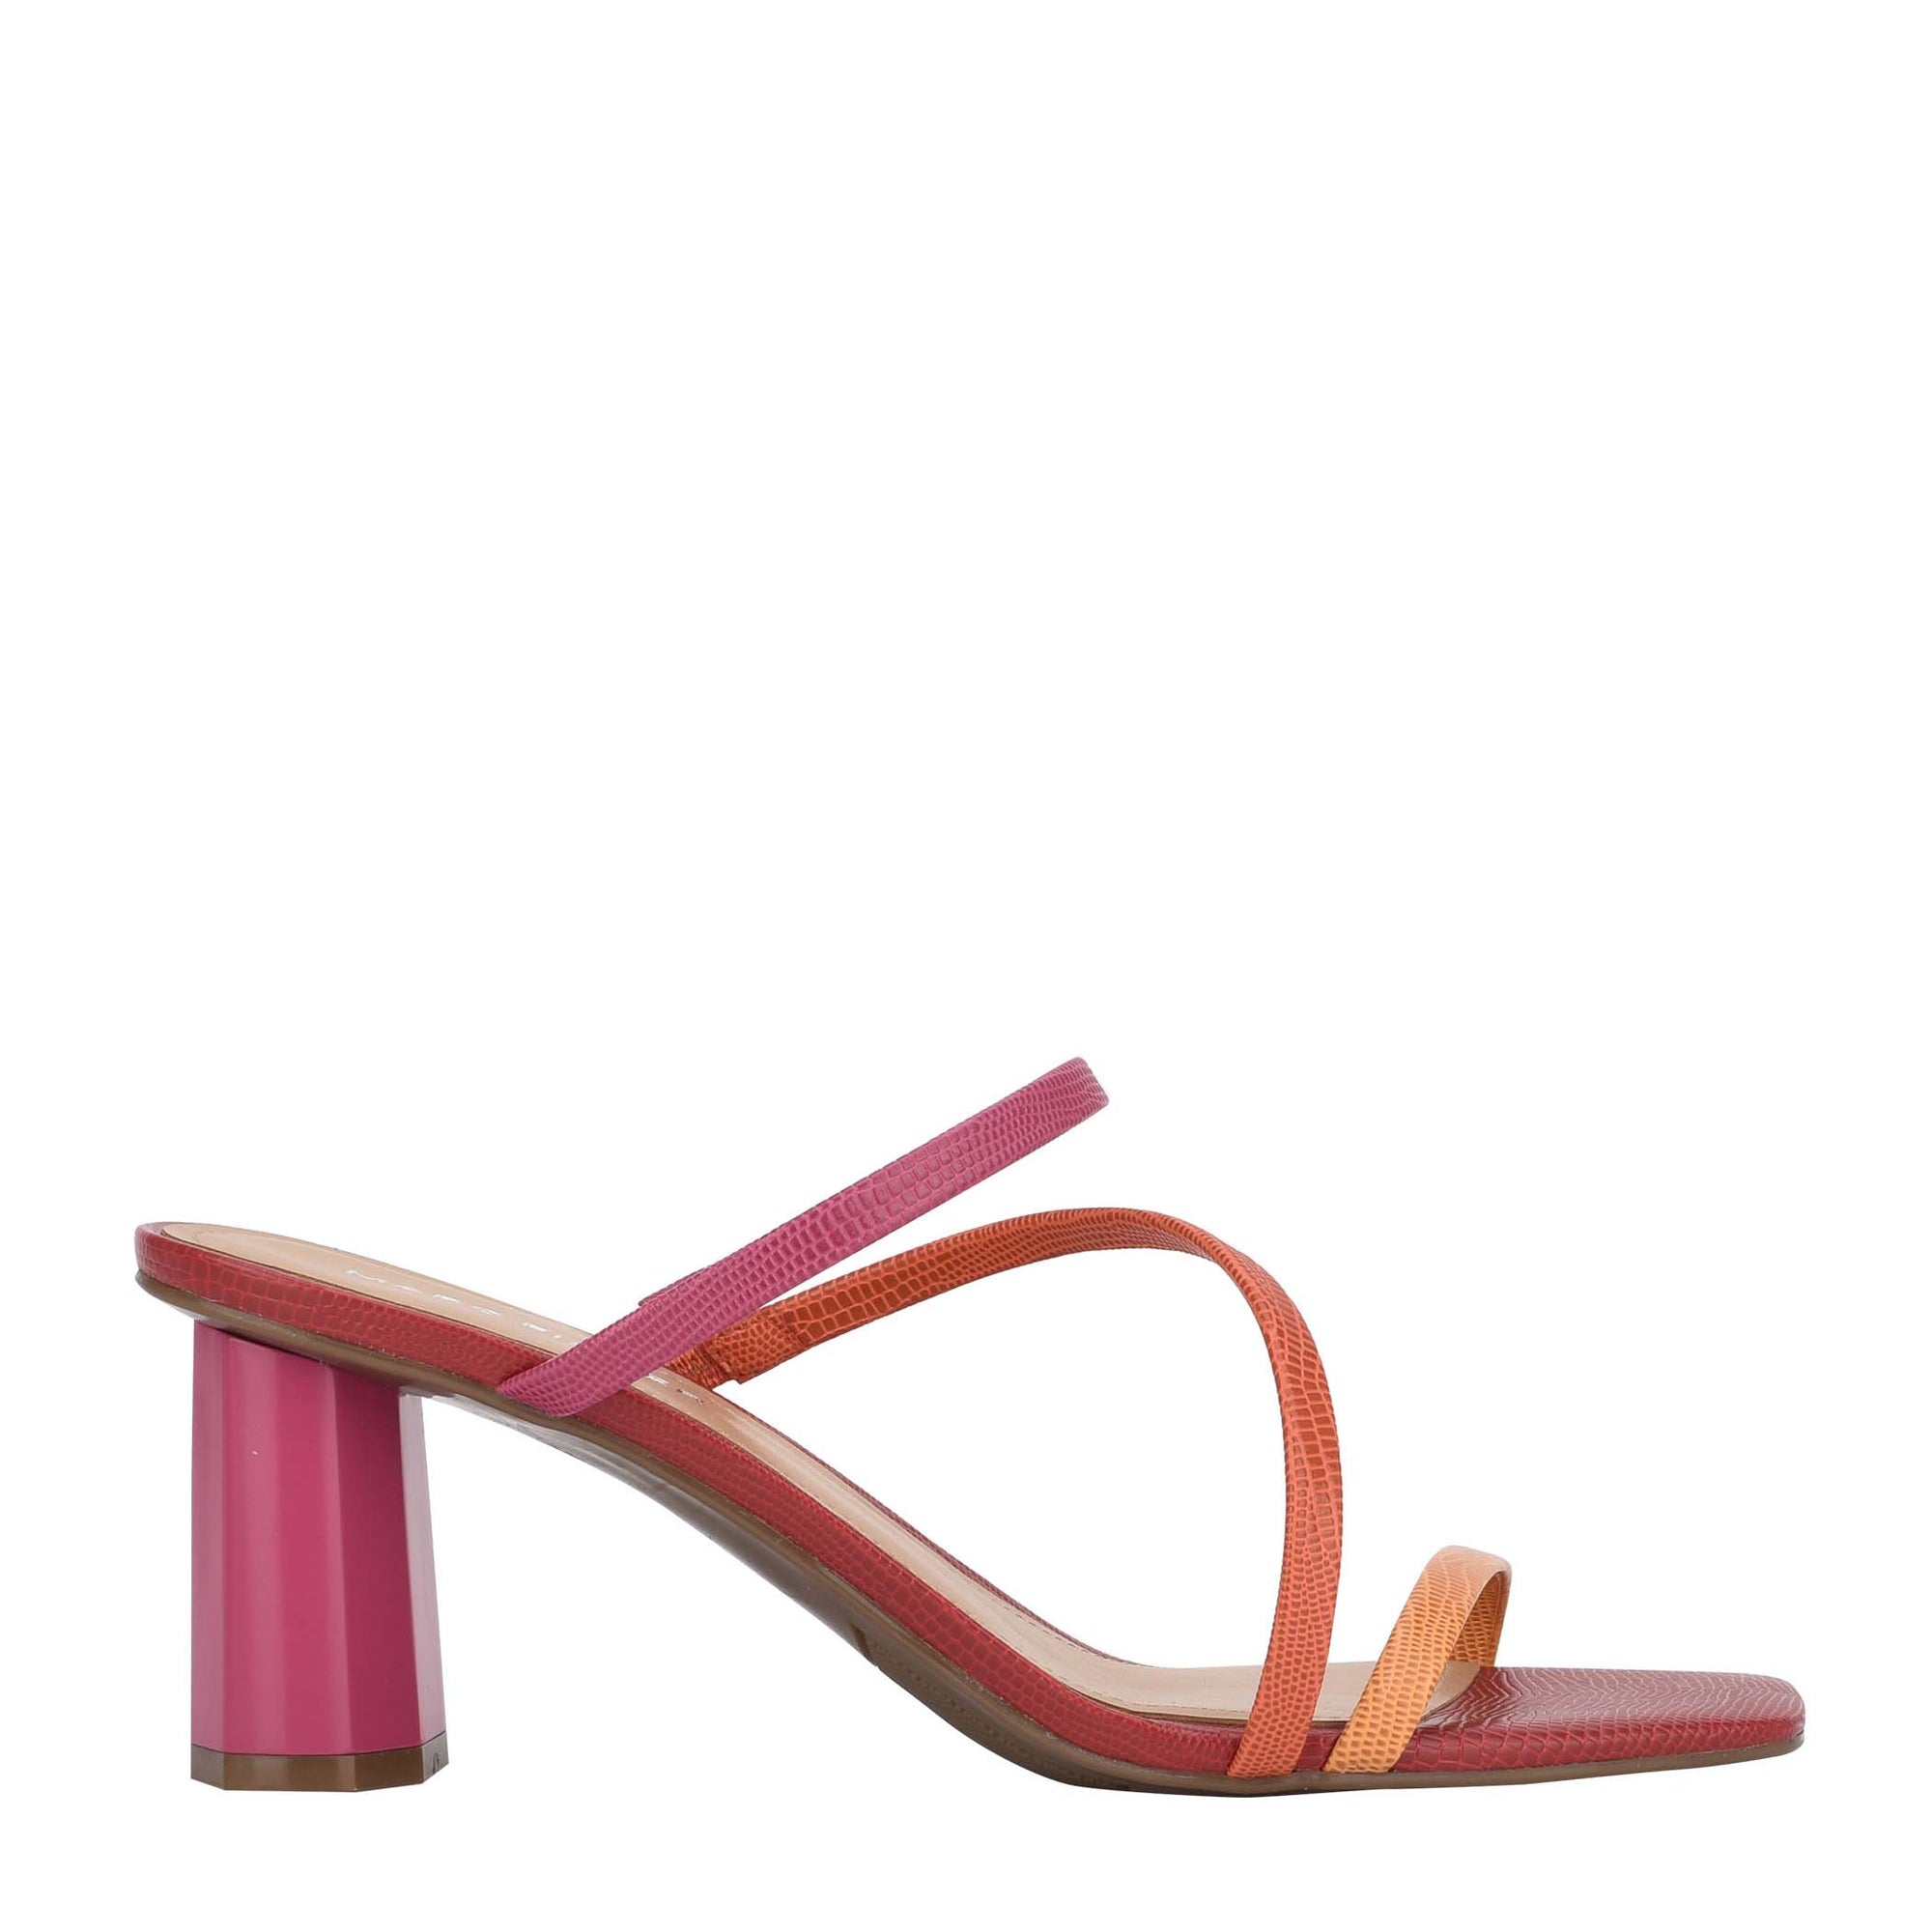 marc fisher strappy heels